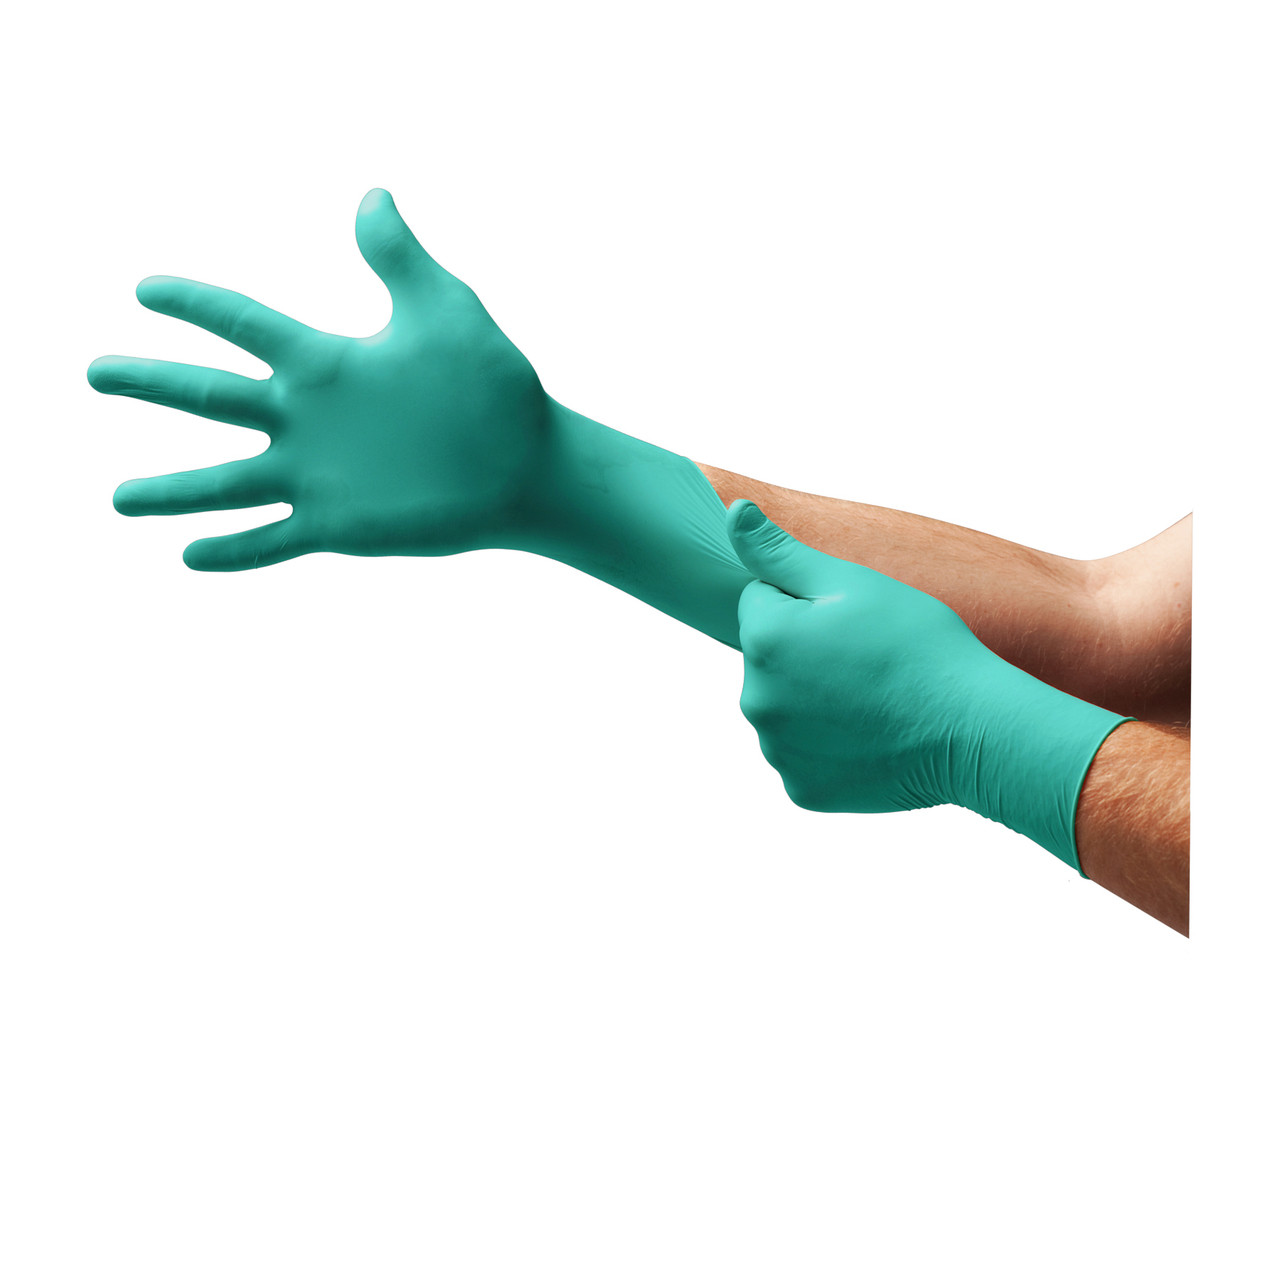 Lab Use Thick PVC Coating Dots on Palm Chemical Resistant Gloves